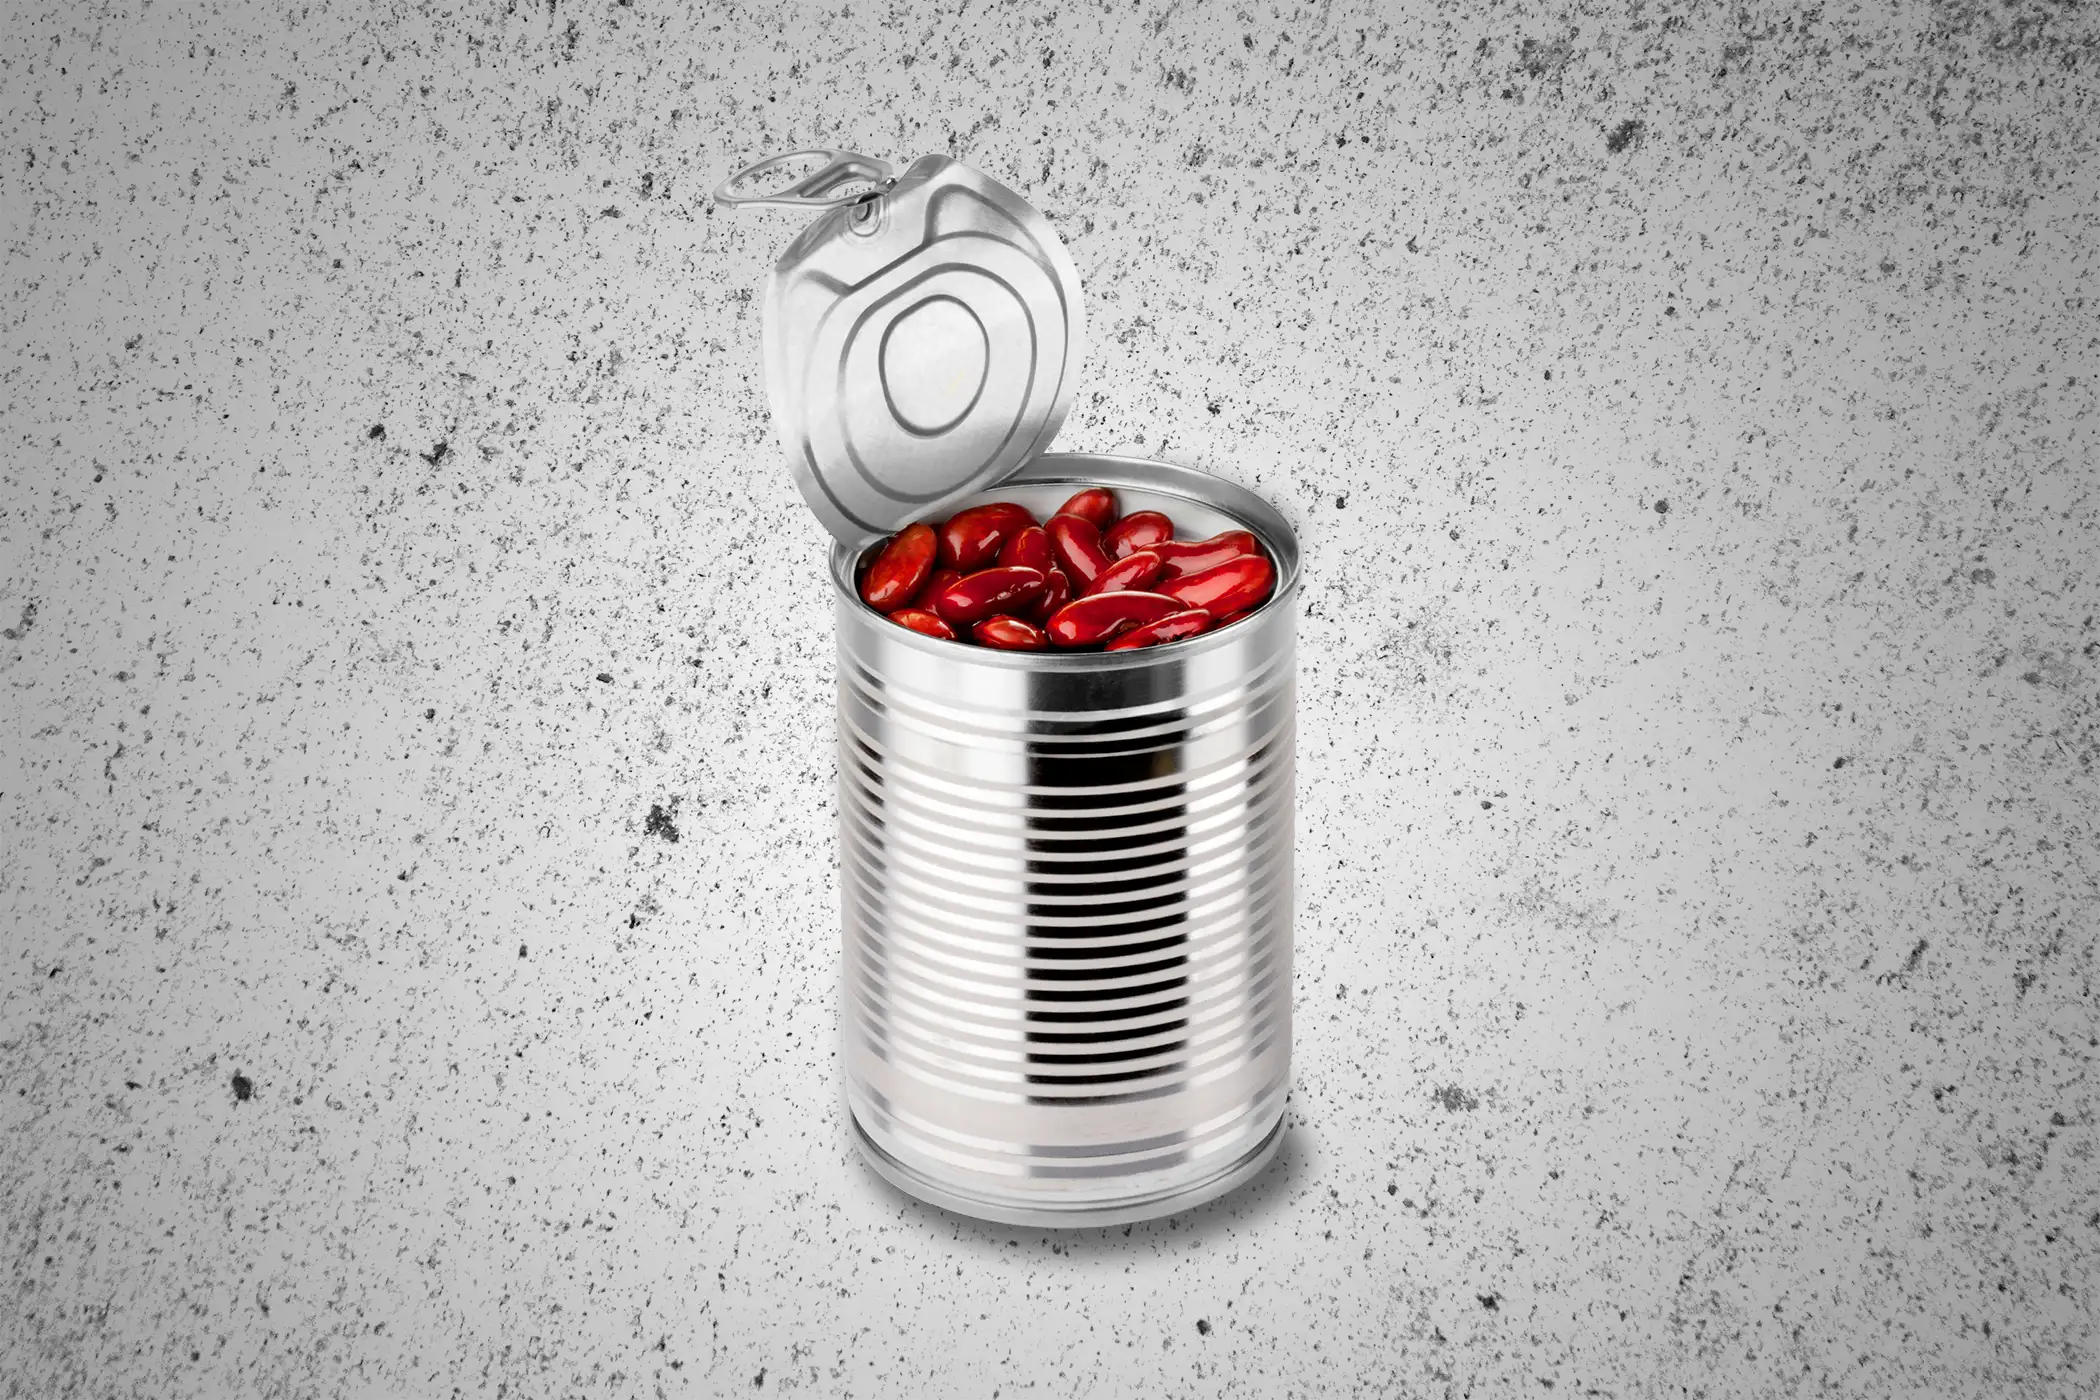 can of beans